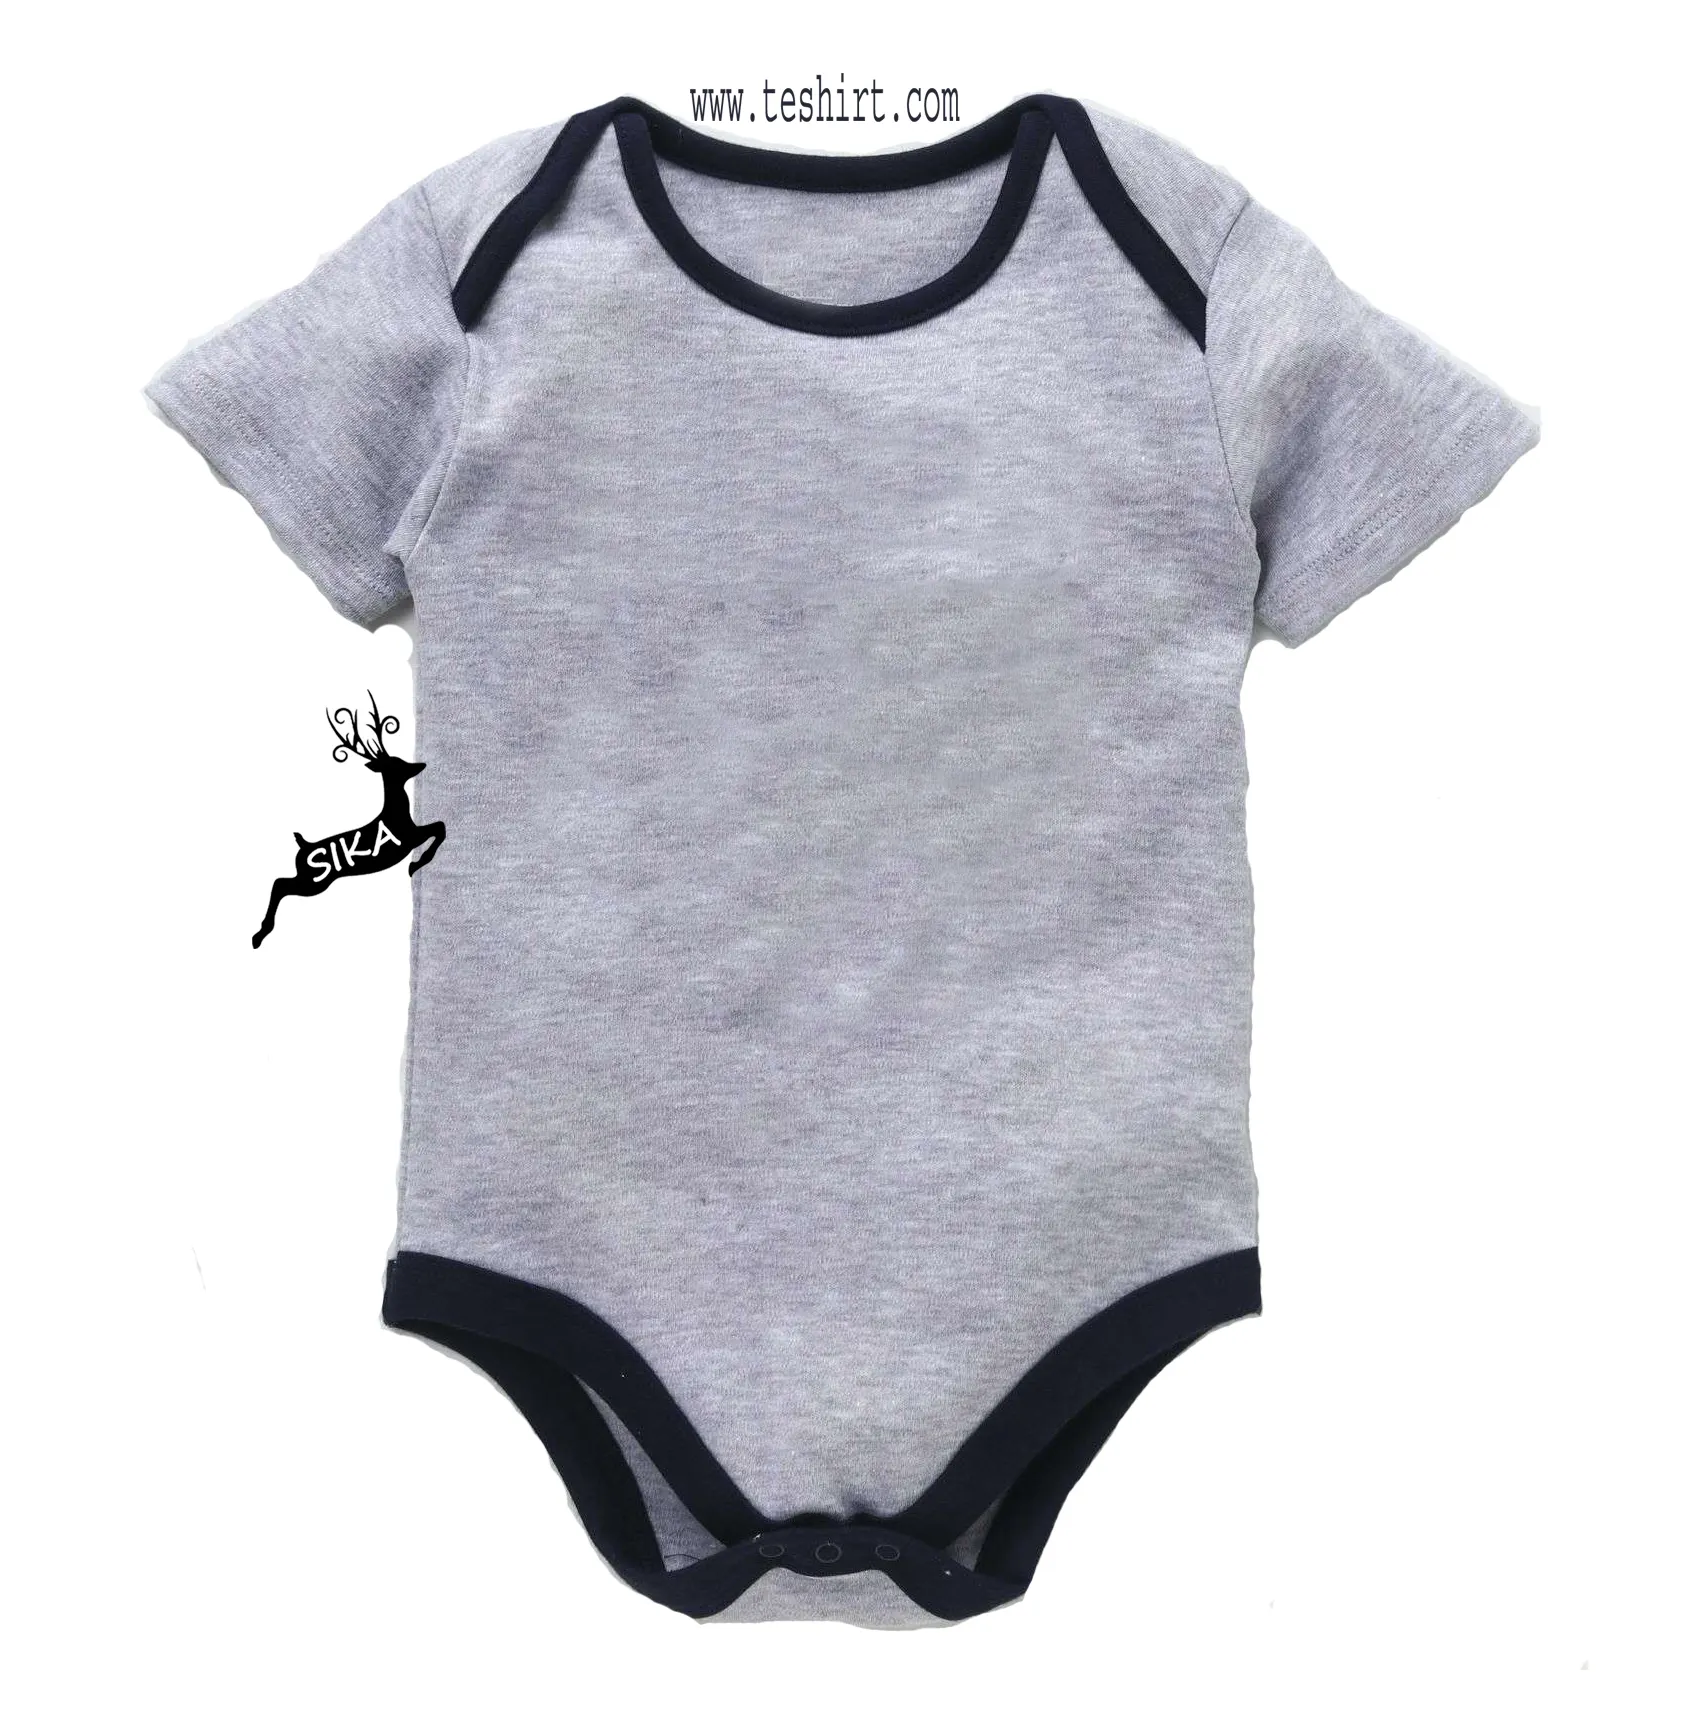 100% cotton oem baby romper kids clothing manufacturing wholesale baby clothes infant new romper plain baby romper